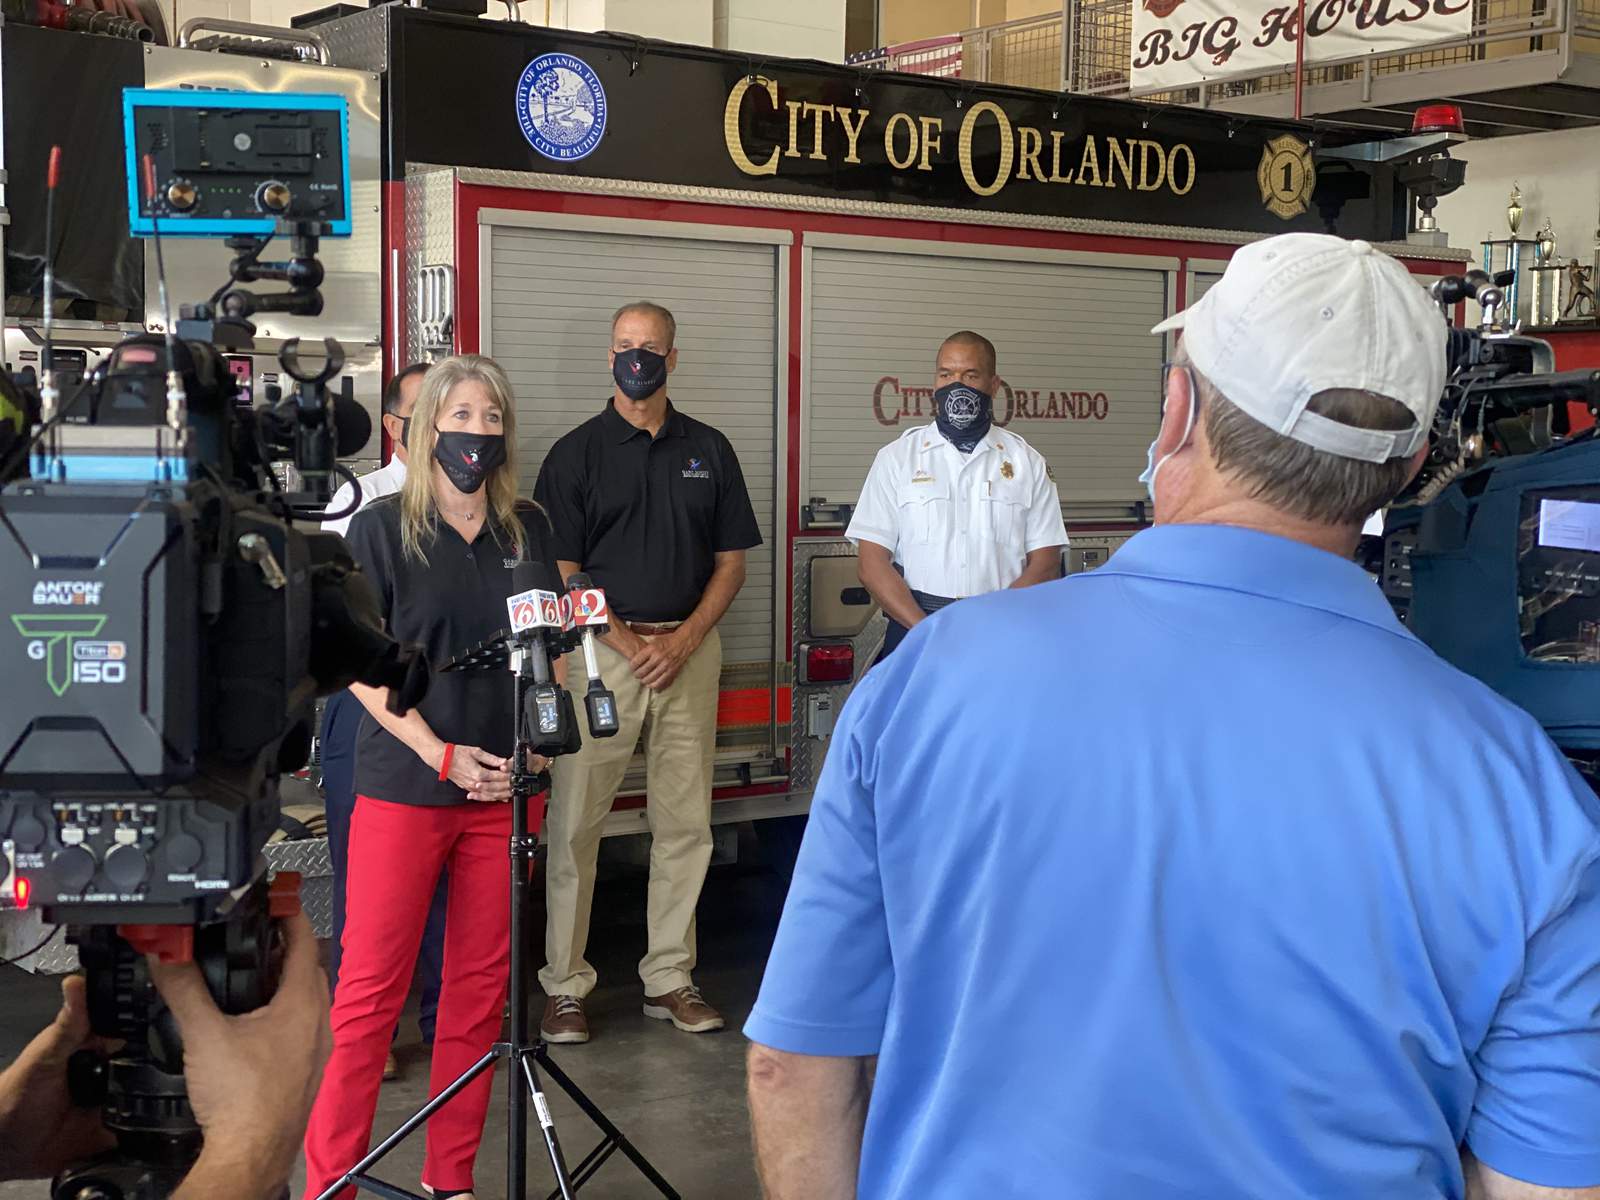 Gary Sinise Foundation delivers meals to Orlando firefighters